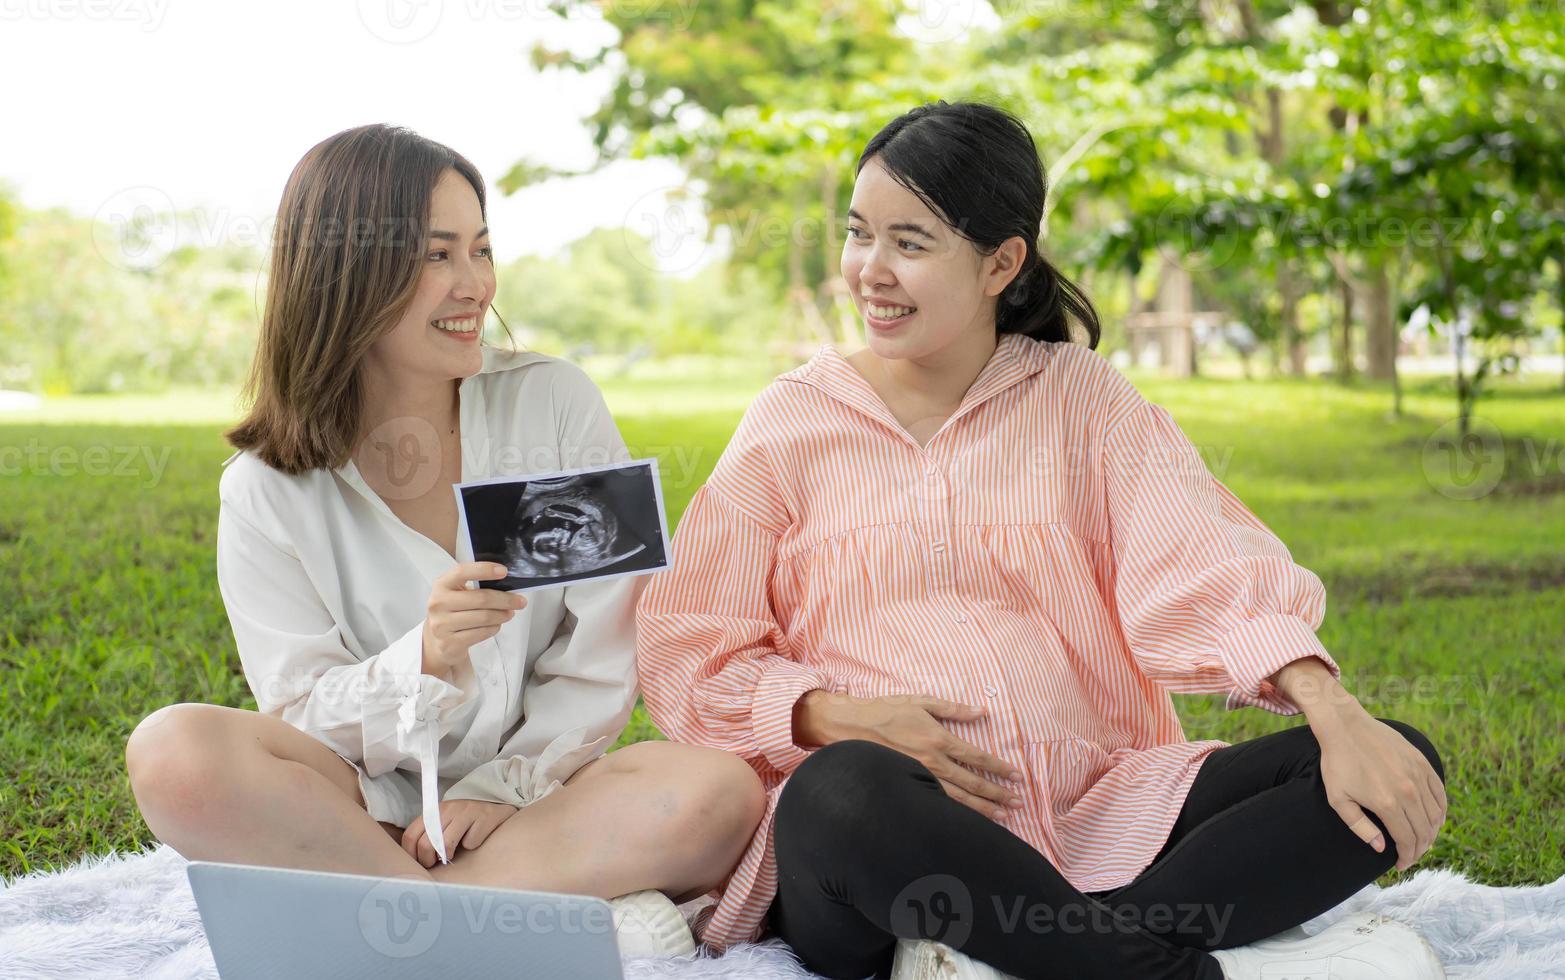 Happy pregnant woman lesbian family relaxing in park. Homosexual people has affectionate relationship like married couple. Gay person has equality to be parent. Lgbtq pregnancy maternity lifestyle. photo